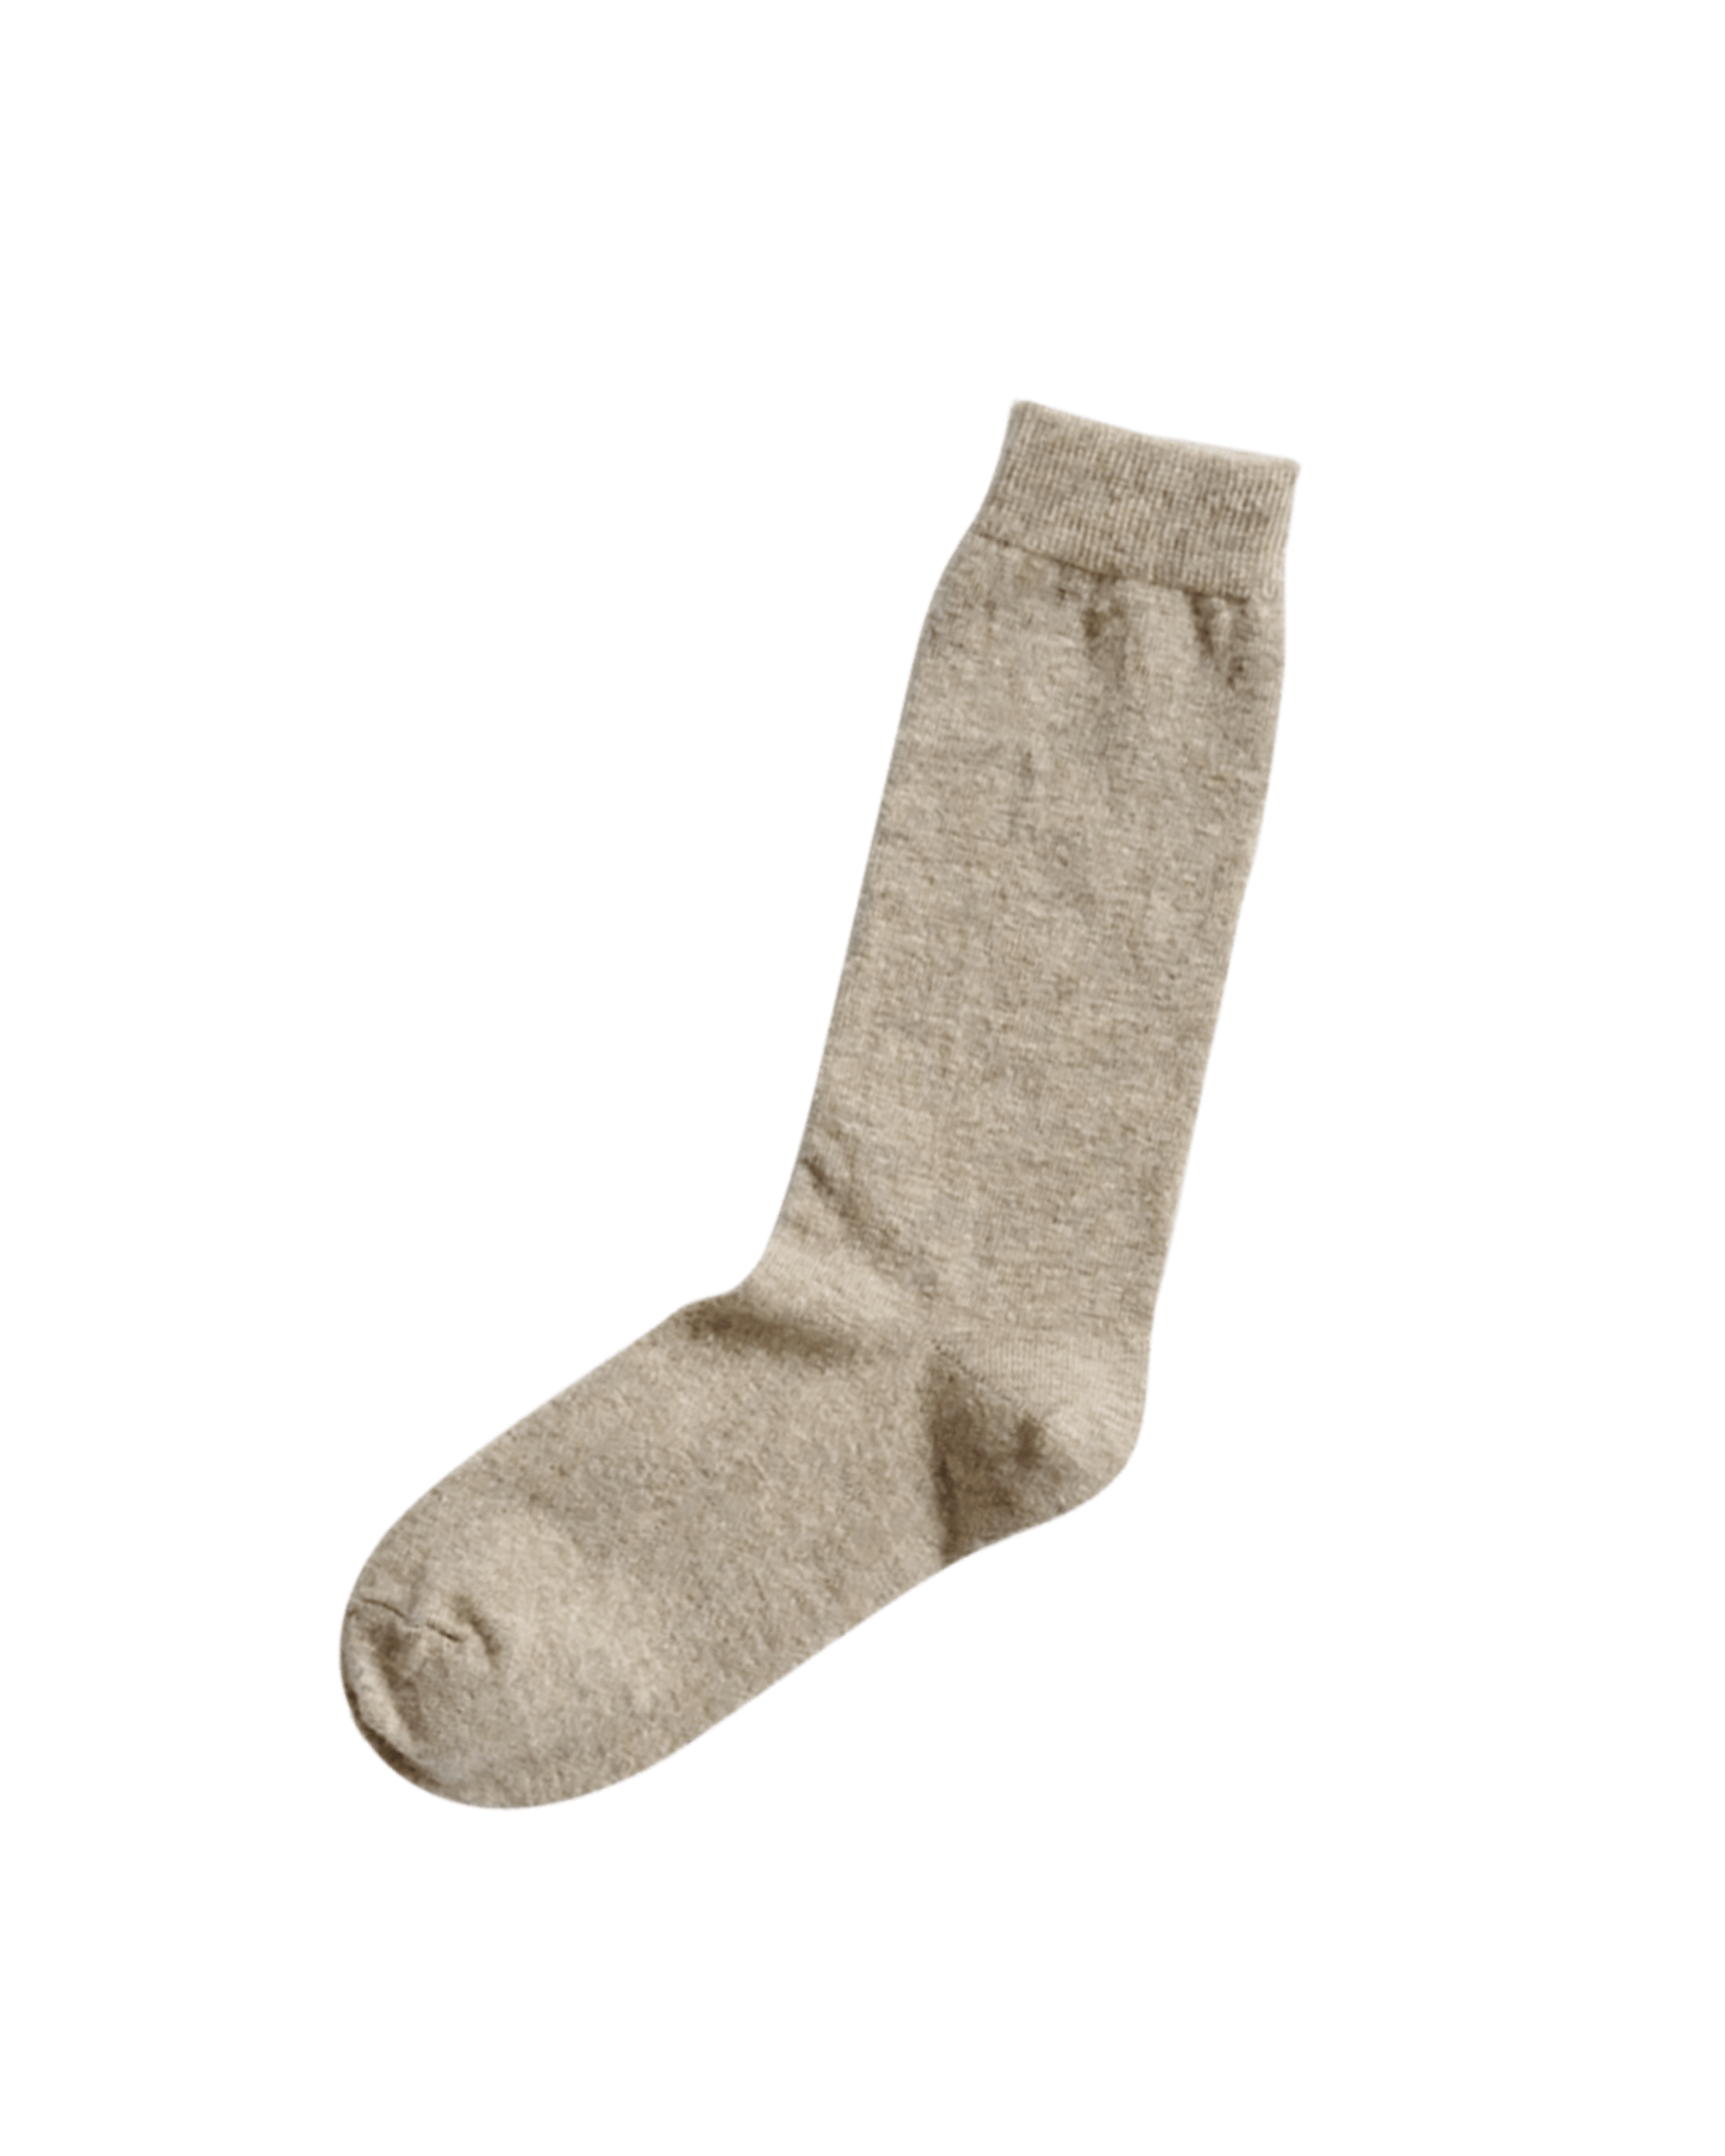 cashmere wool socks from japan